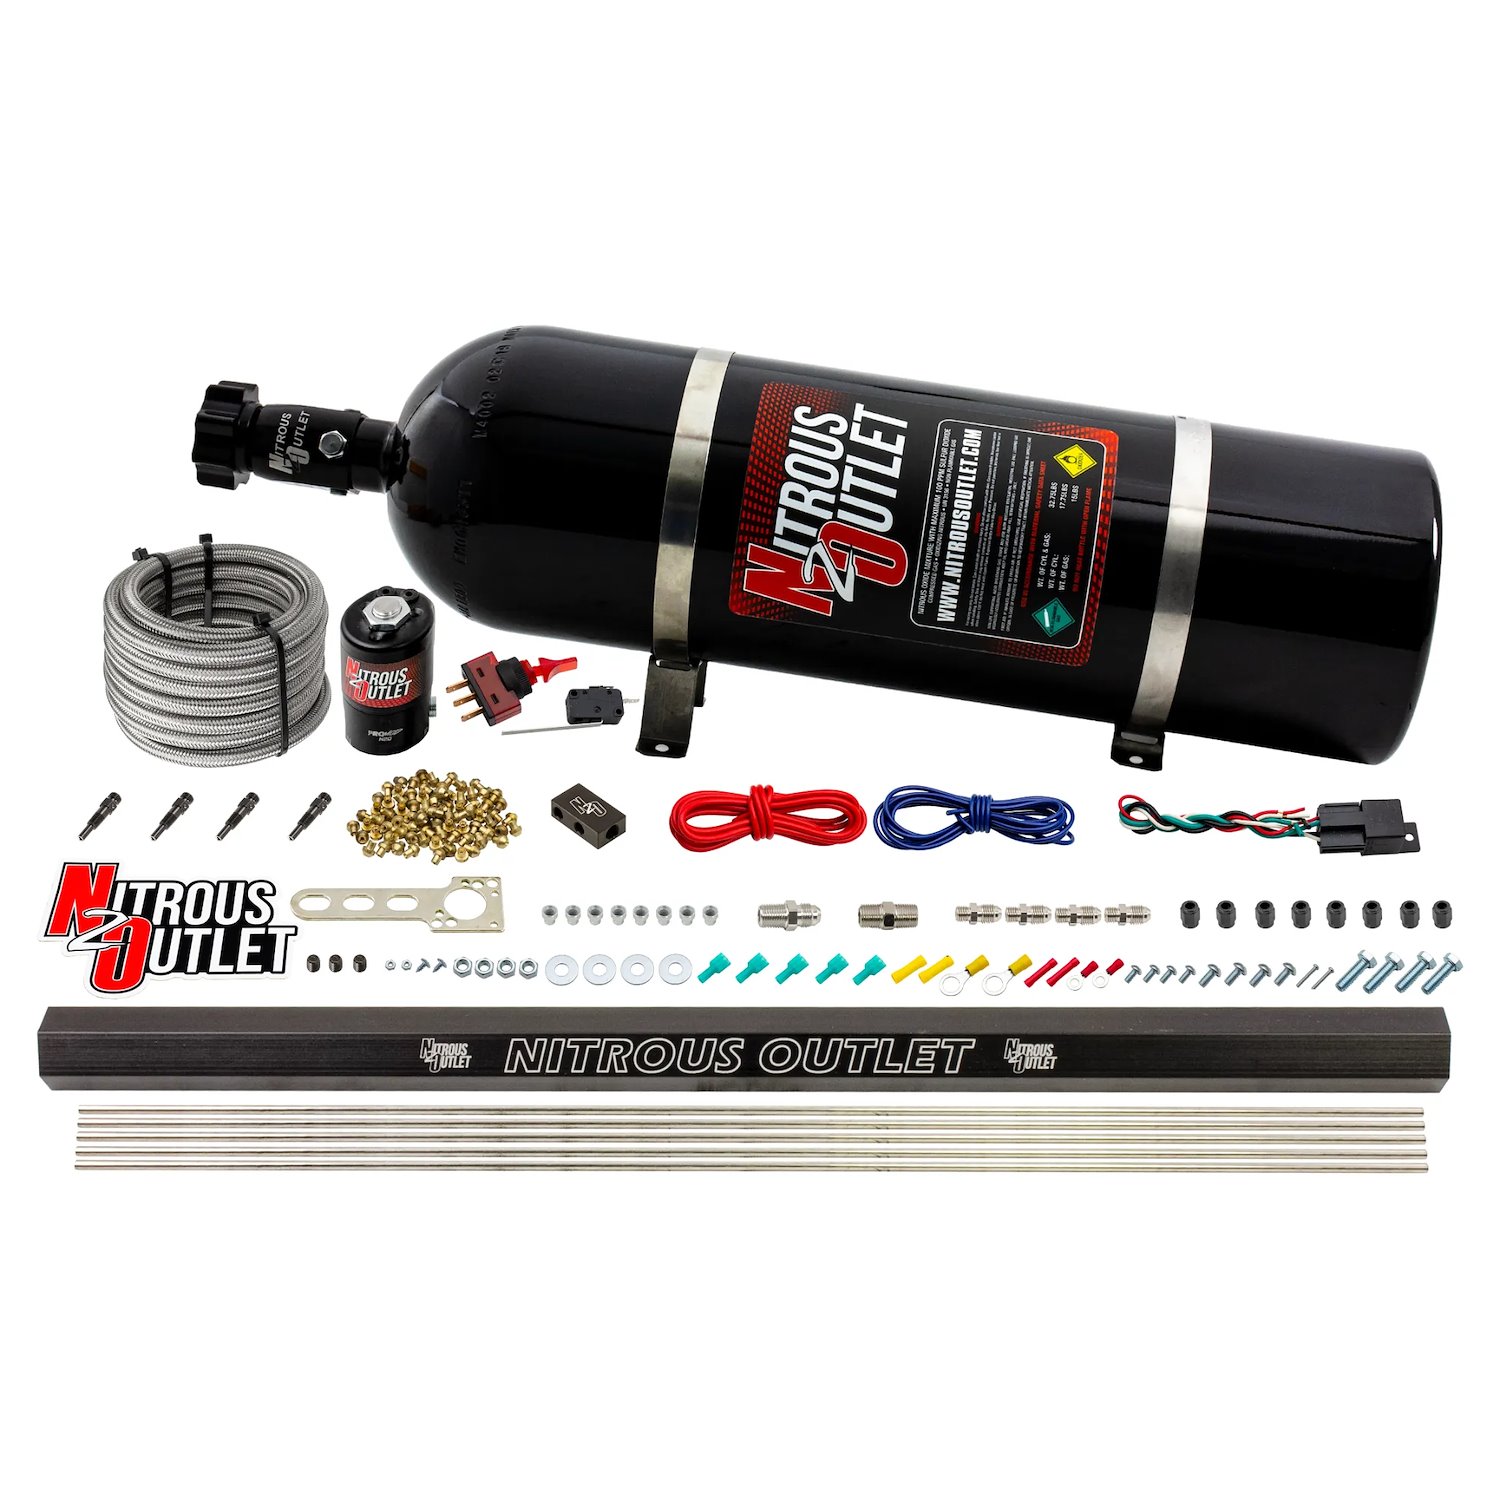 00-10361-SBT-15 Dry 4-Cyl Direct Port System, -.122 Nitrous Solenoid/Injection Rail/SBT Discharge Nozzles, 50-250HP, 15lb Bottle